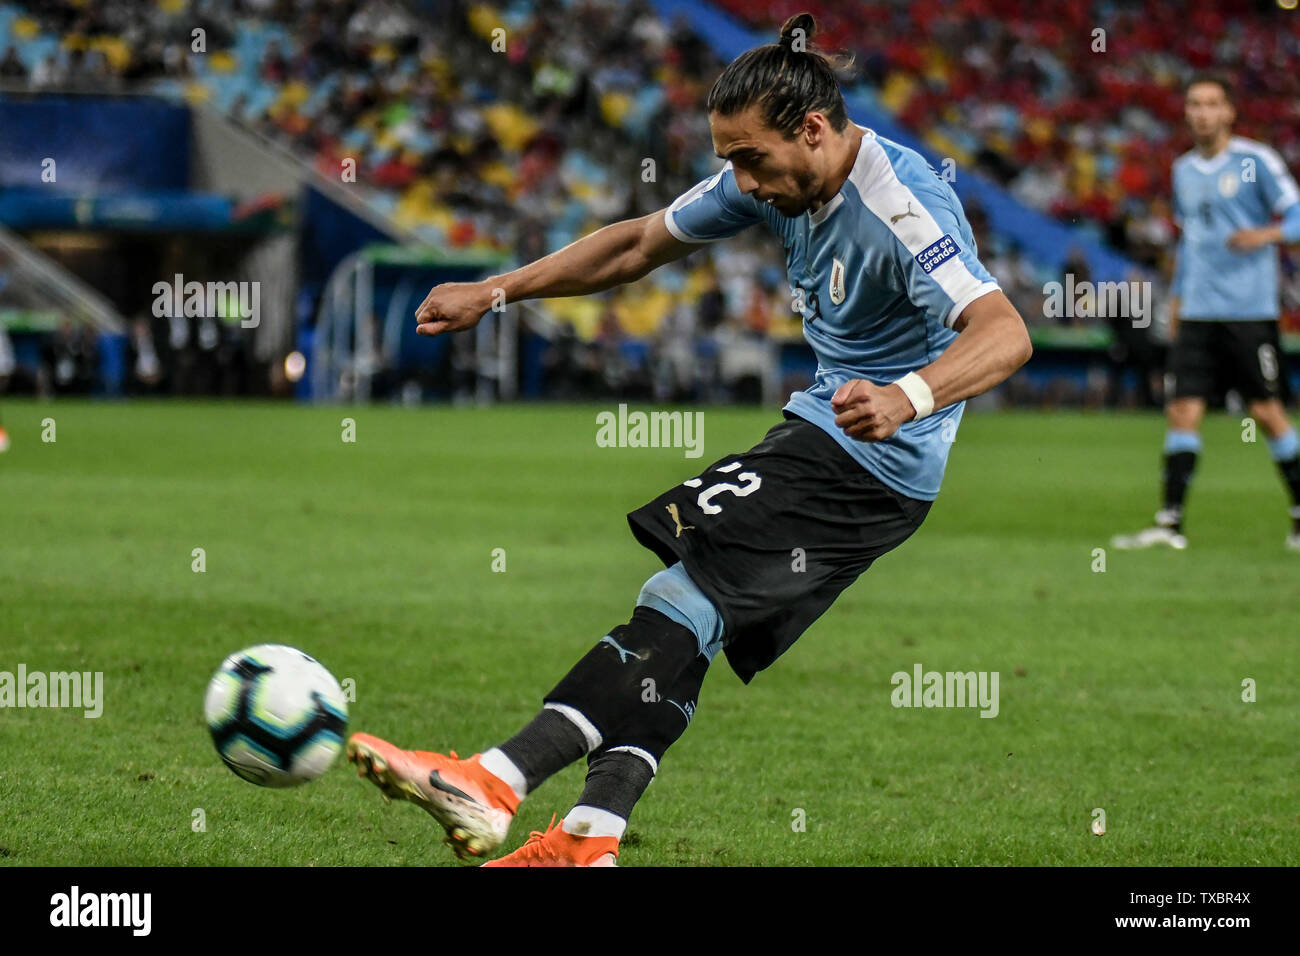 Rio De Janeiro, Brazil. 24th June, 2019. Martin Caceres during a match between Chile and Uruguay, valid for the group stage of the Copa America 2019, held this Monday (24) at the Maracanã Stadium in Rio de Janeiro, RJ. Credit: Nayra Halm/FotoArena/Alamy Live News Stock Photo